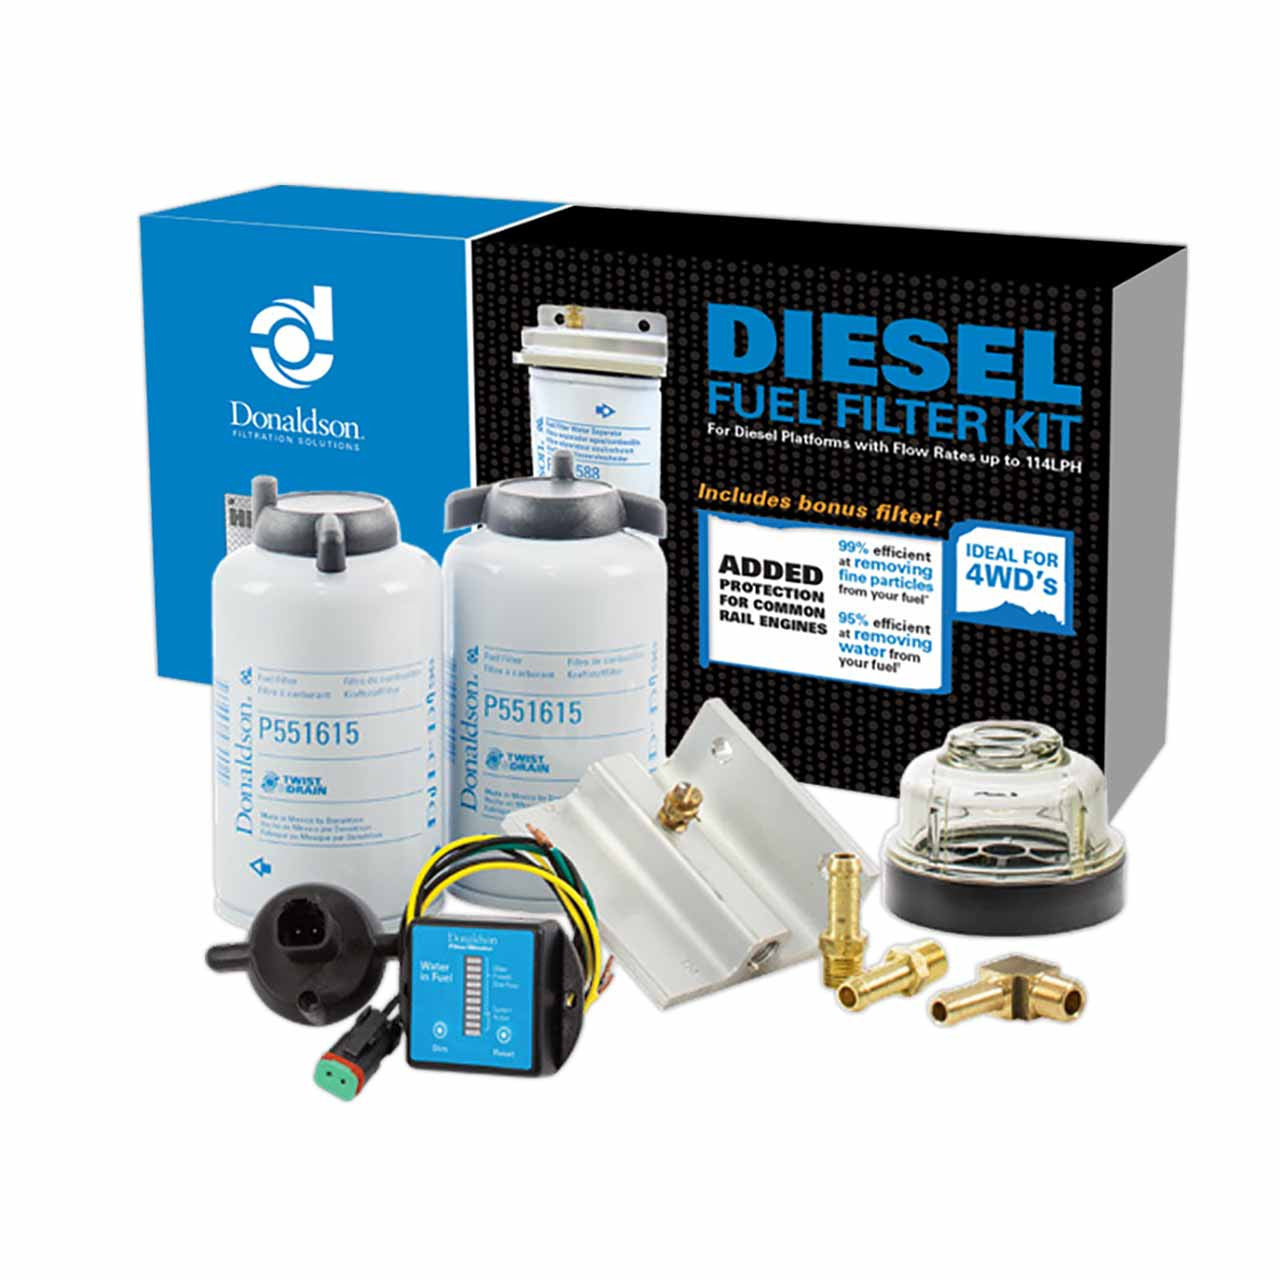 X900165 Donaldson Diesel Fuel Filter Kit with Sensor - 3 Micron Flow Rates Up To 114lph